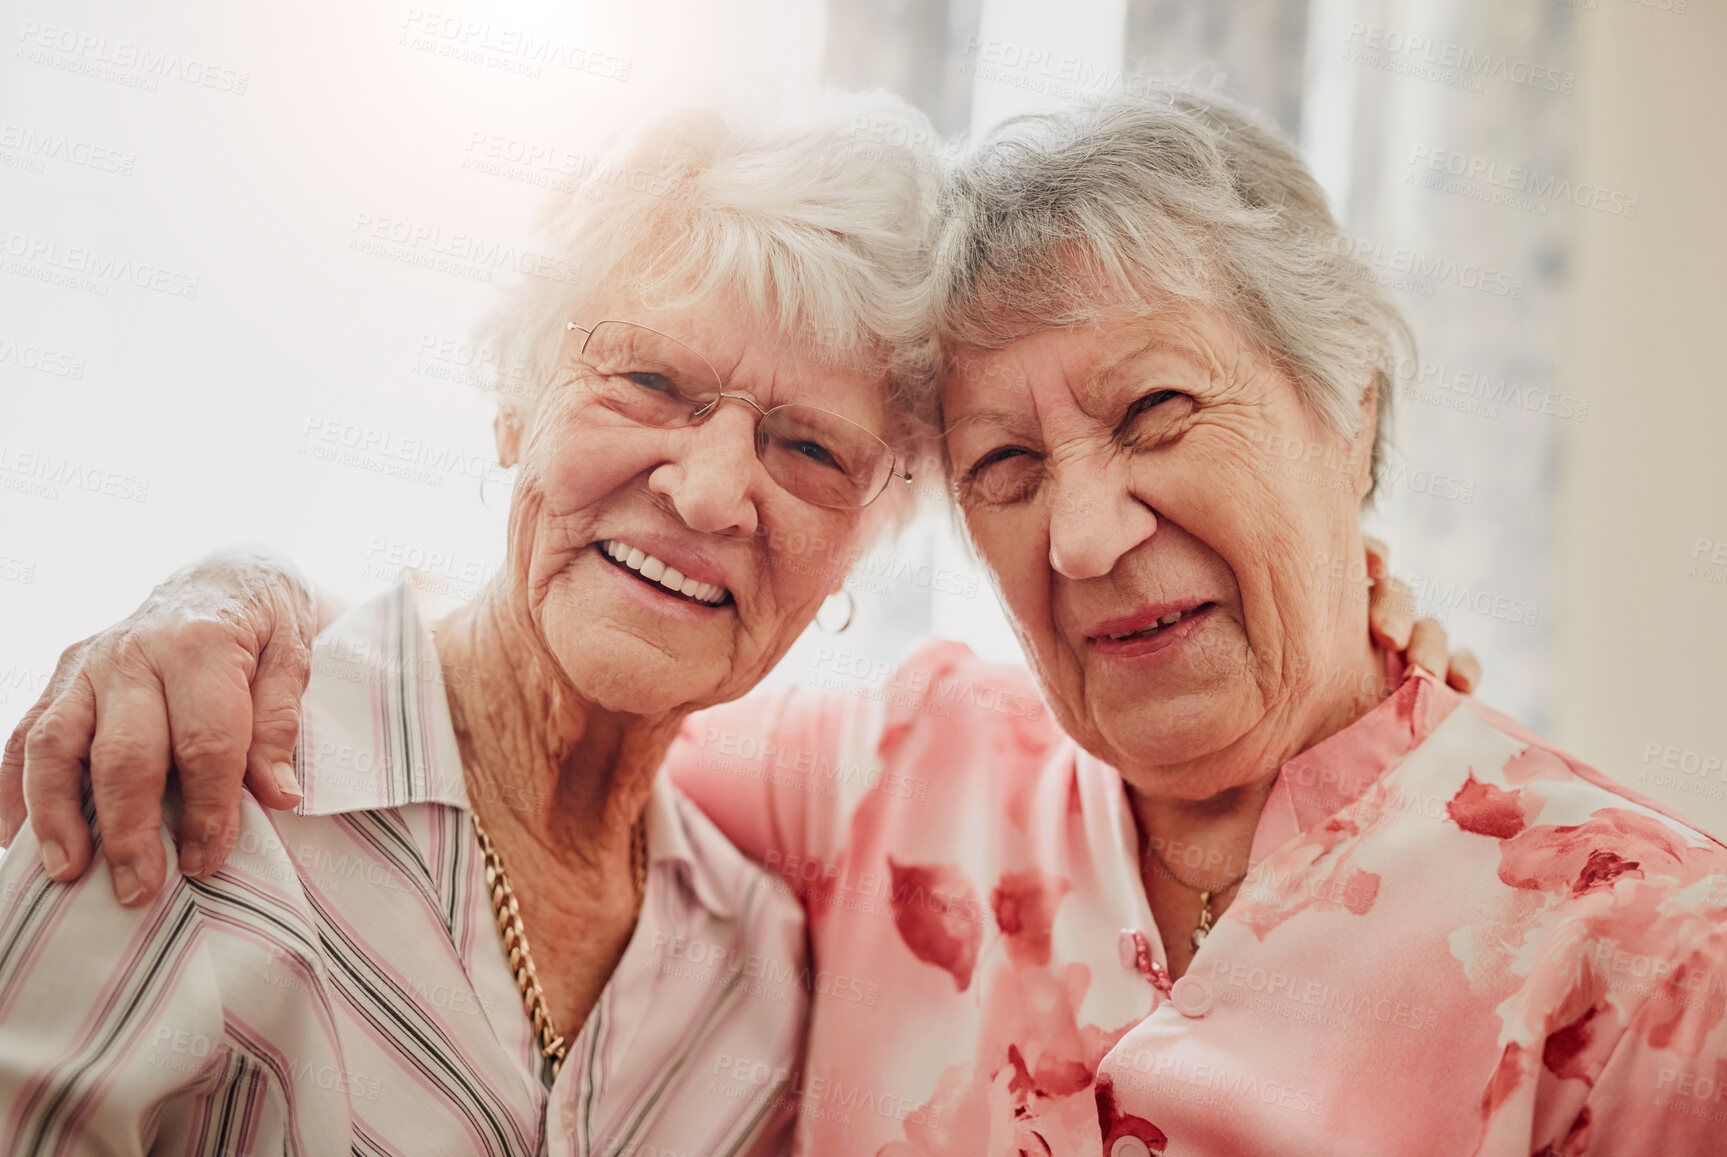 Buy stock photo Elderly women, friends and hug in house with smile in portrait for care, love or bonding with reunion. Senior people, embrace and happy for connection in morning, lounge or together in nursing home